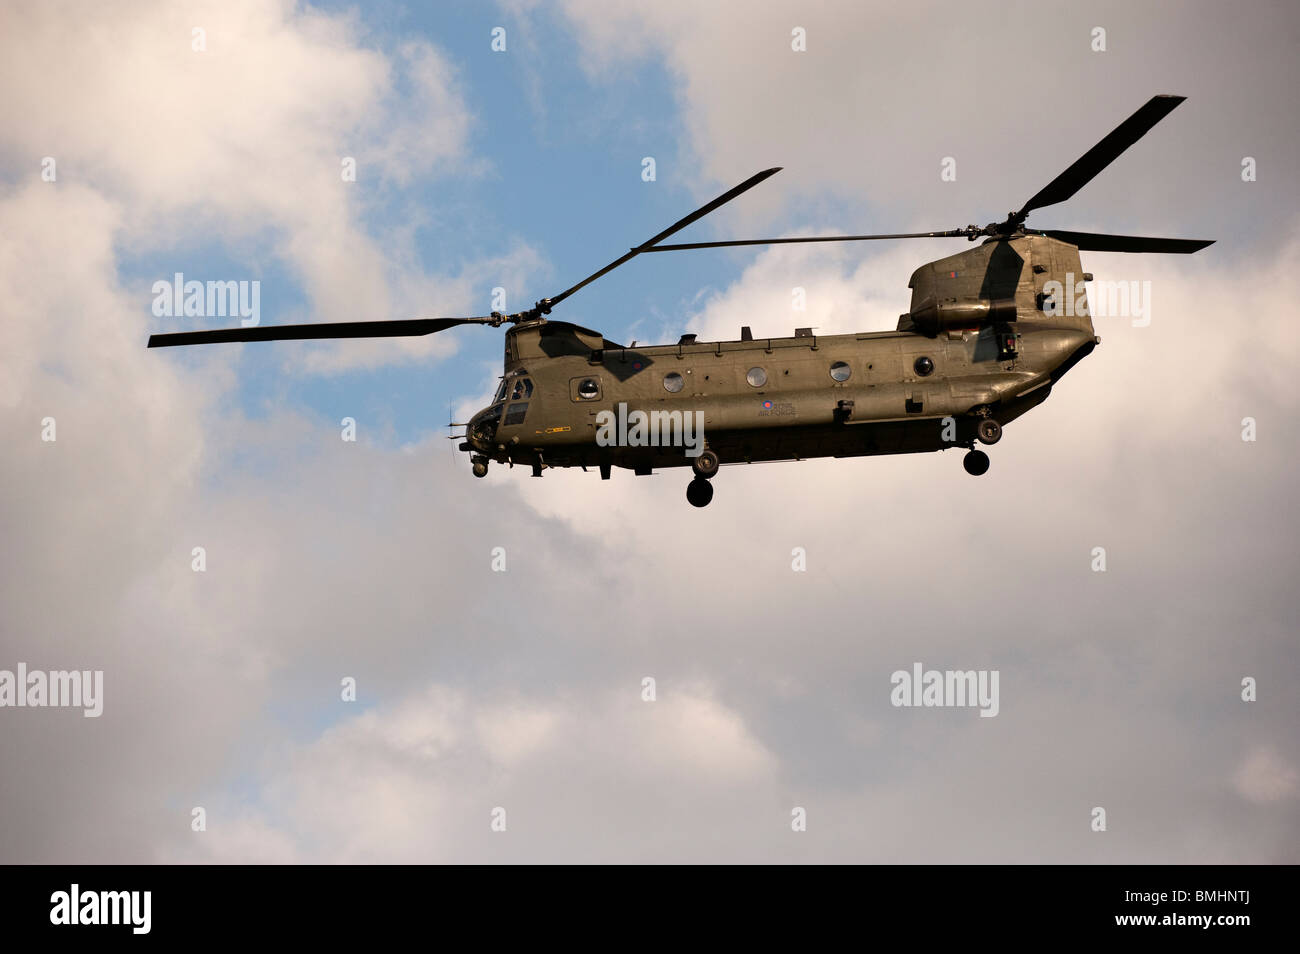 RAF Chinook helicopter on training exercise over British countryside Stock Photo